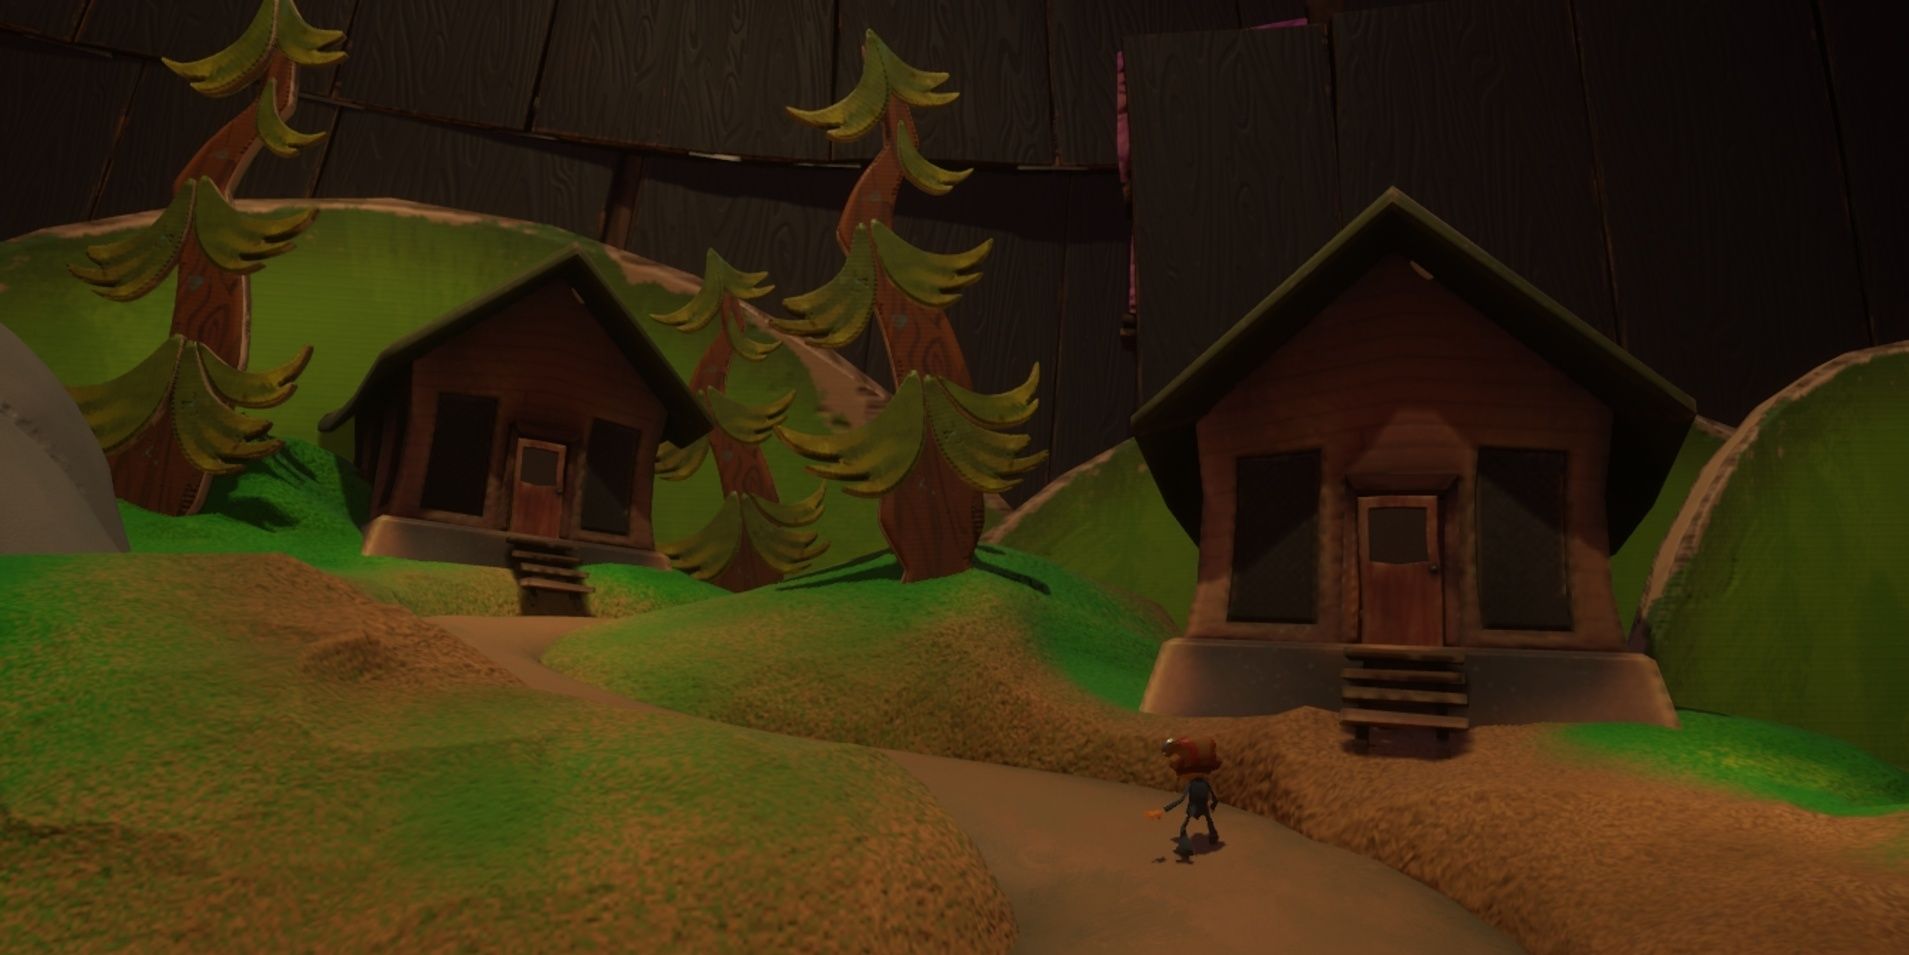 The cabins on set in Psychonauts 2